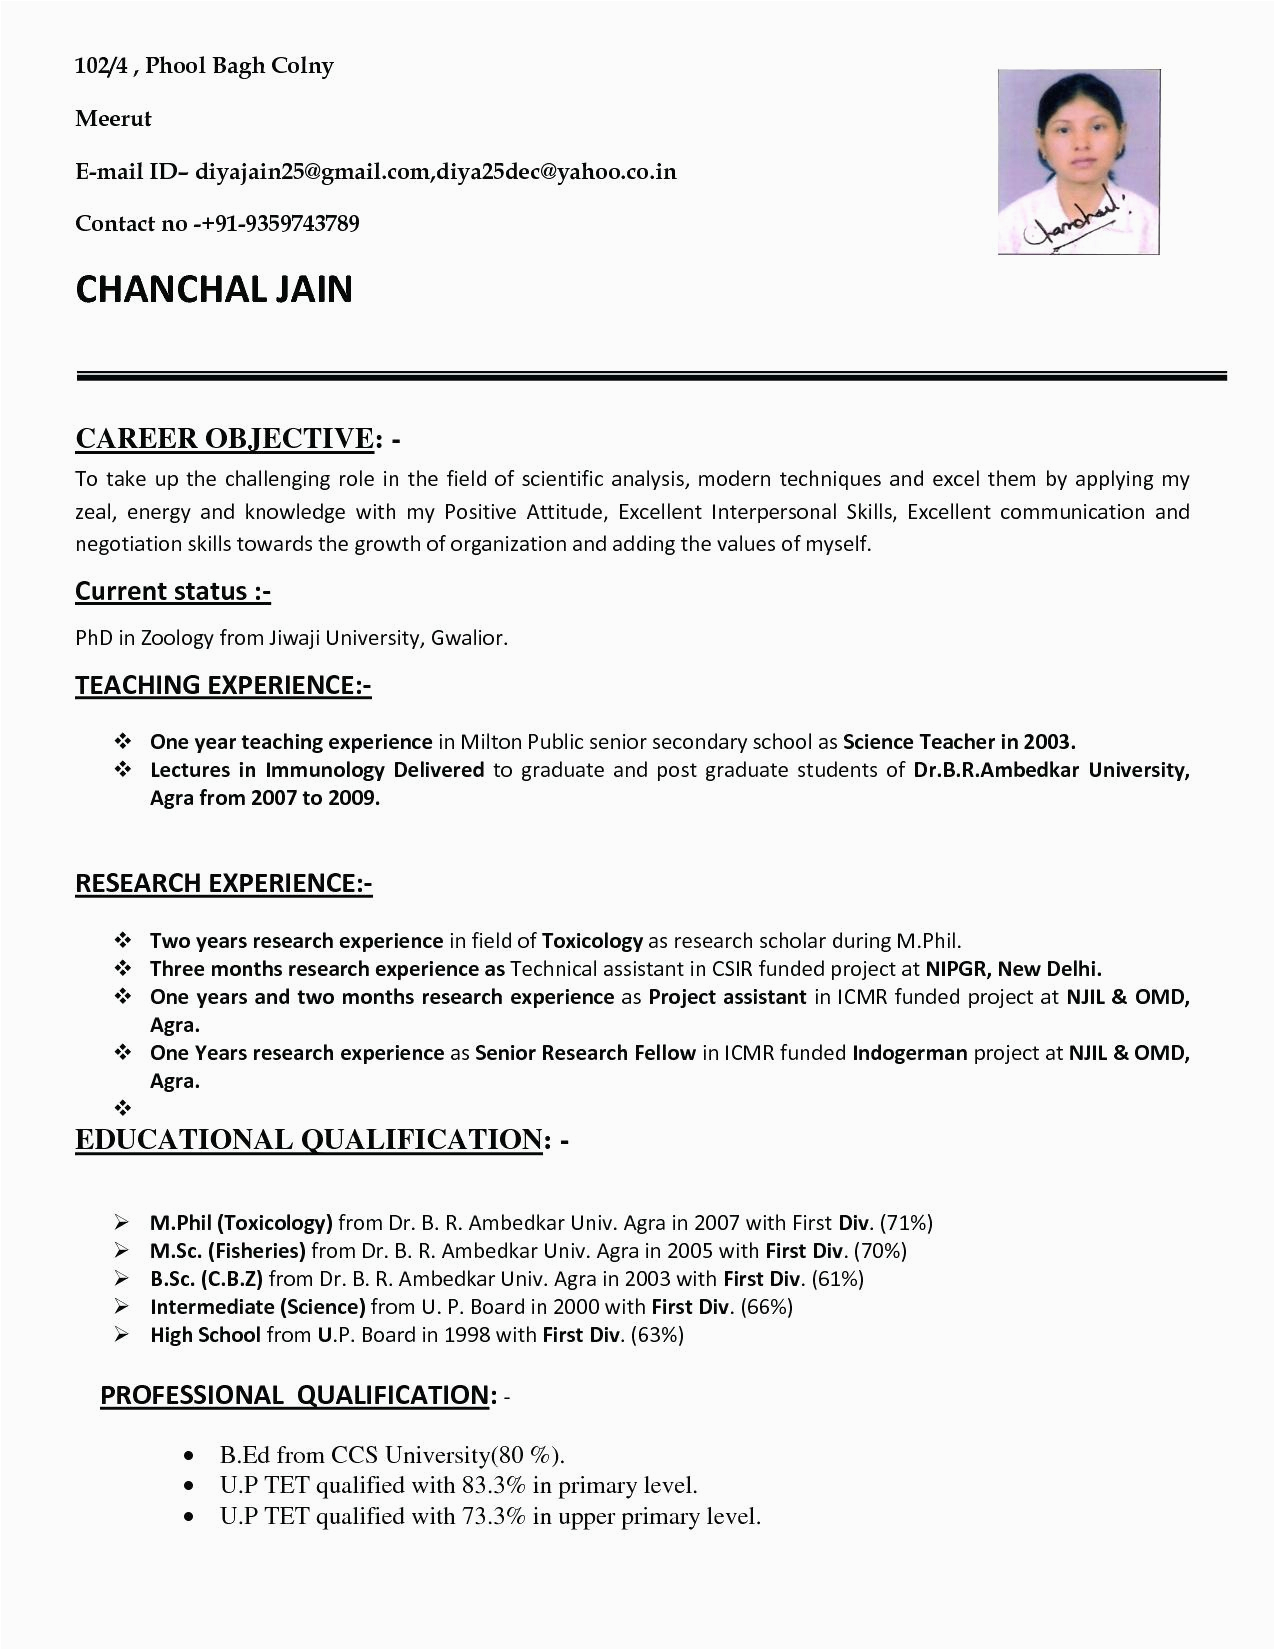 Resume Samples for Jobs In India 12 Resumes Elementary Teachers Radaircars